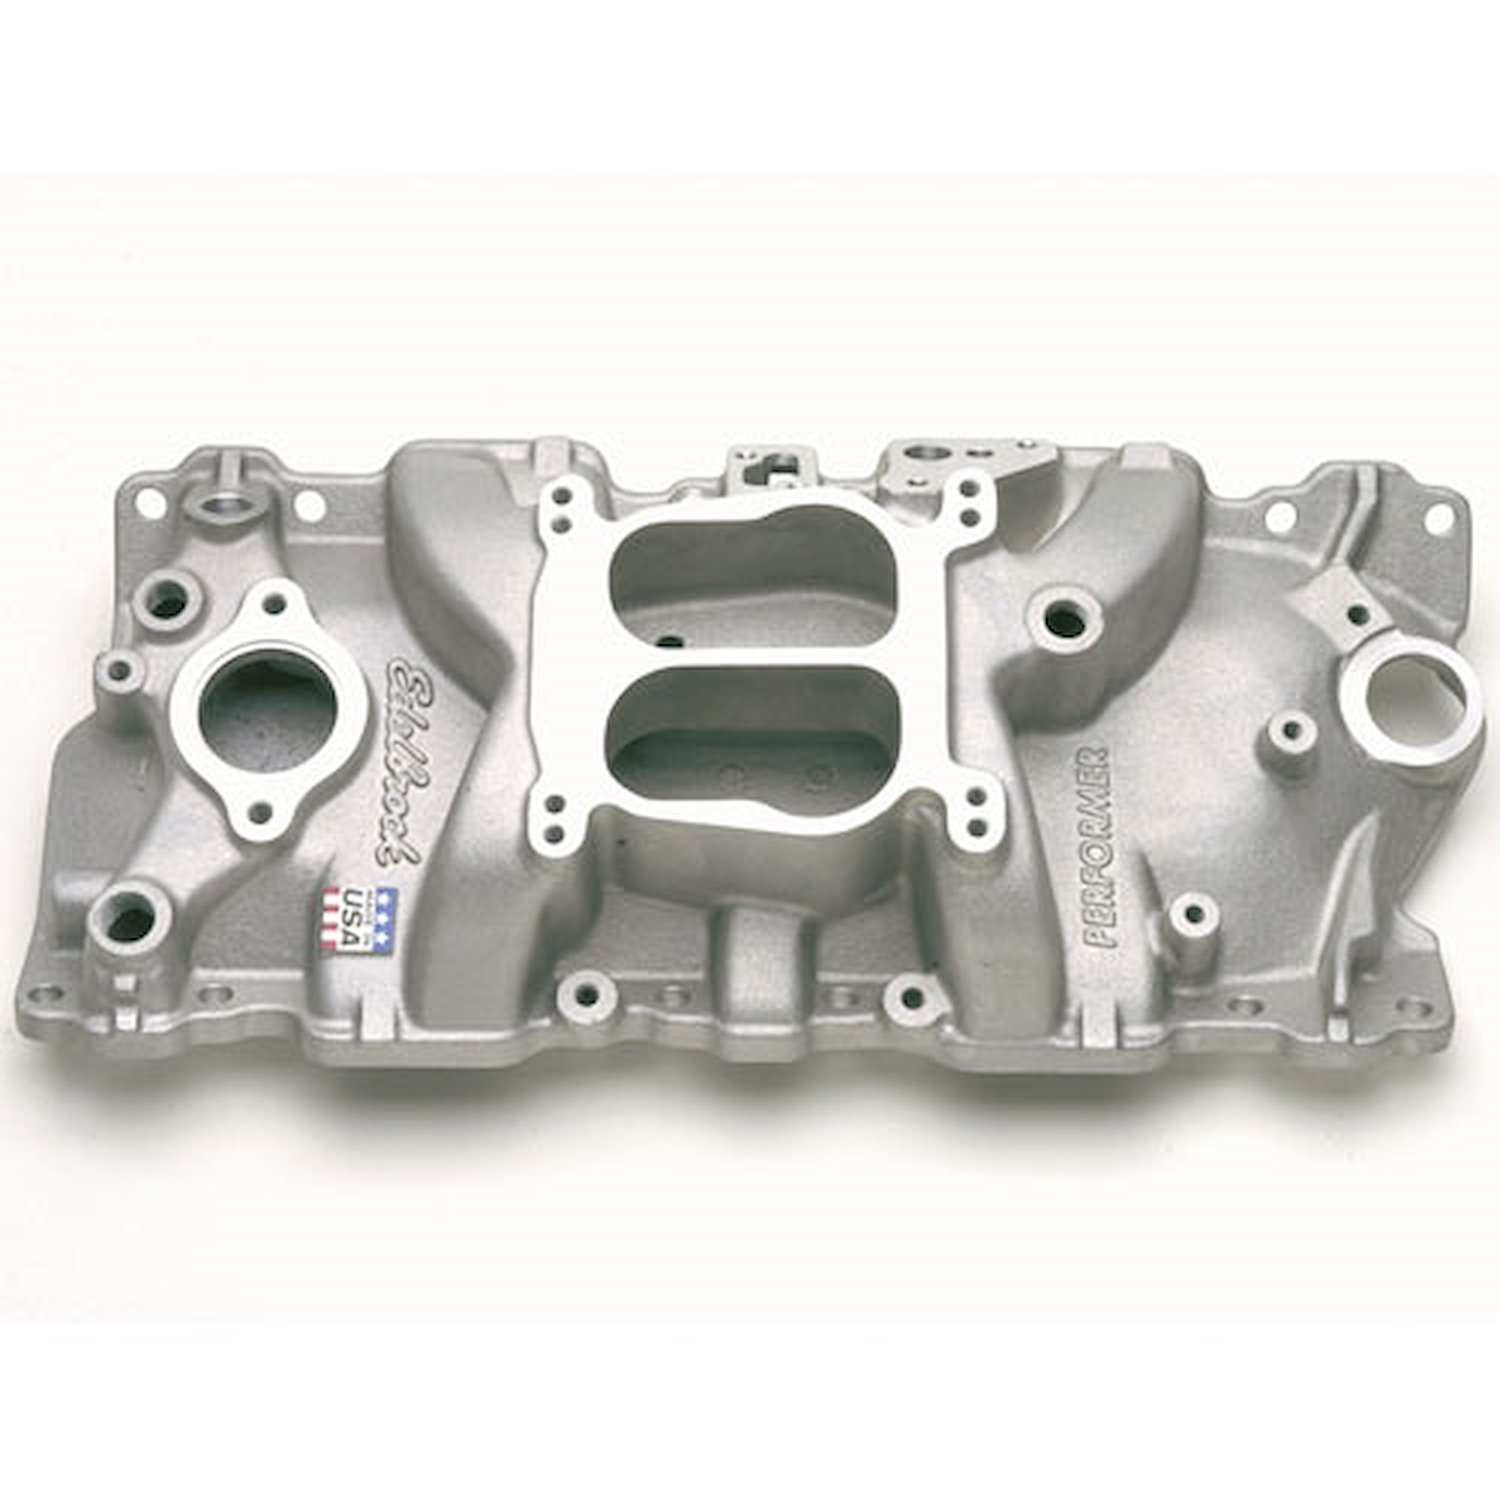 Performer EGR Intake Manifold for Small Block Chevy